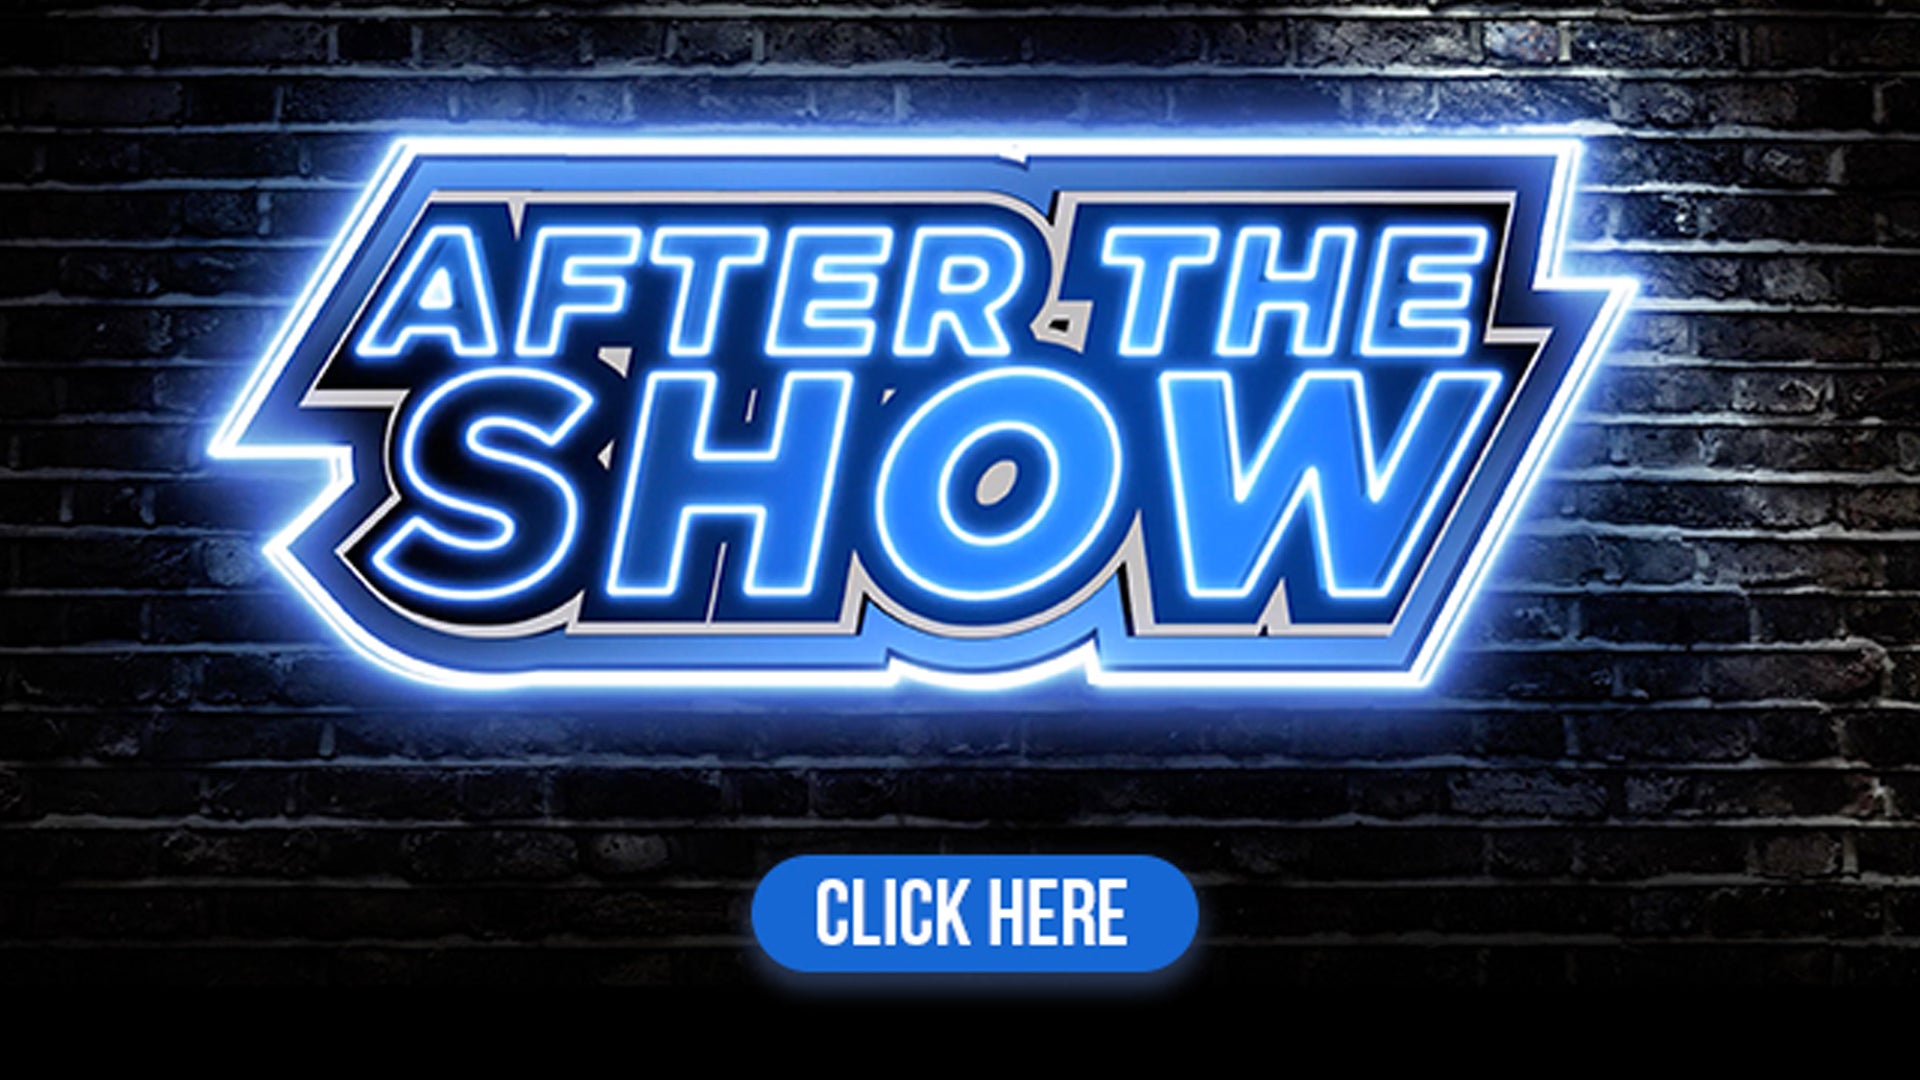 After the show logo